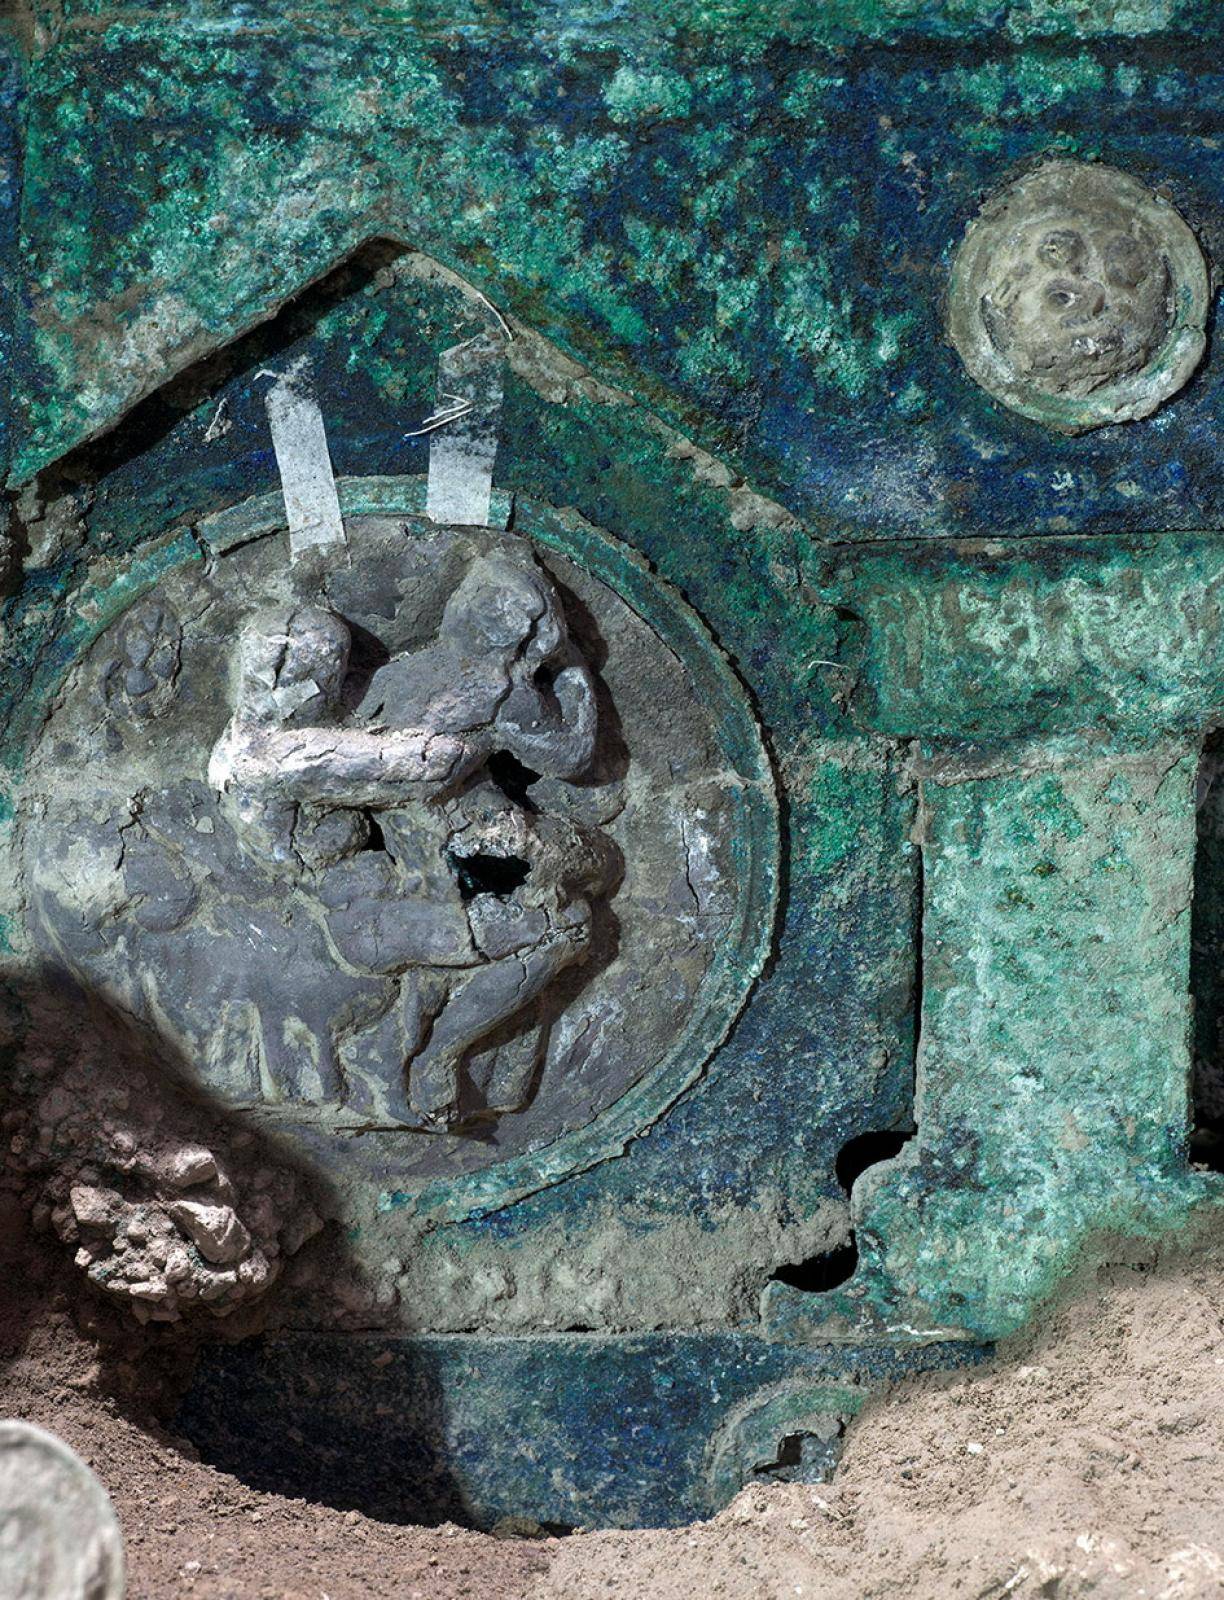 Archeologists uncover an ancient ceremonial carriage near Pompeii